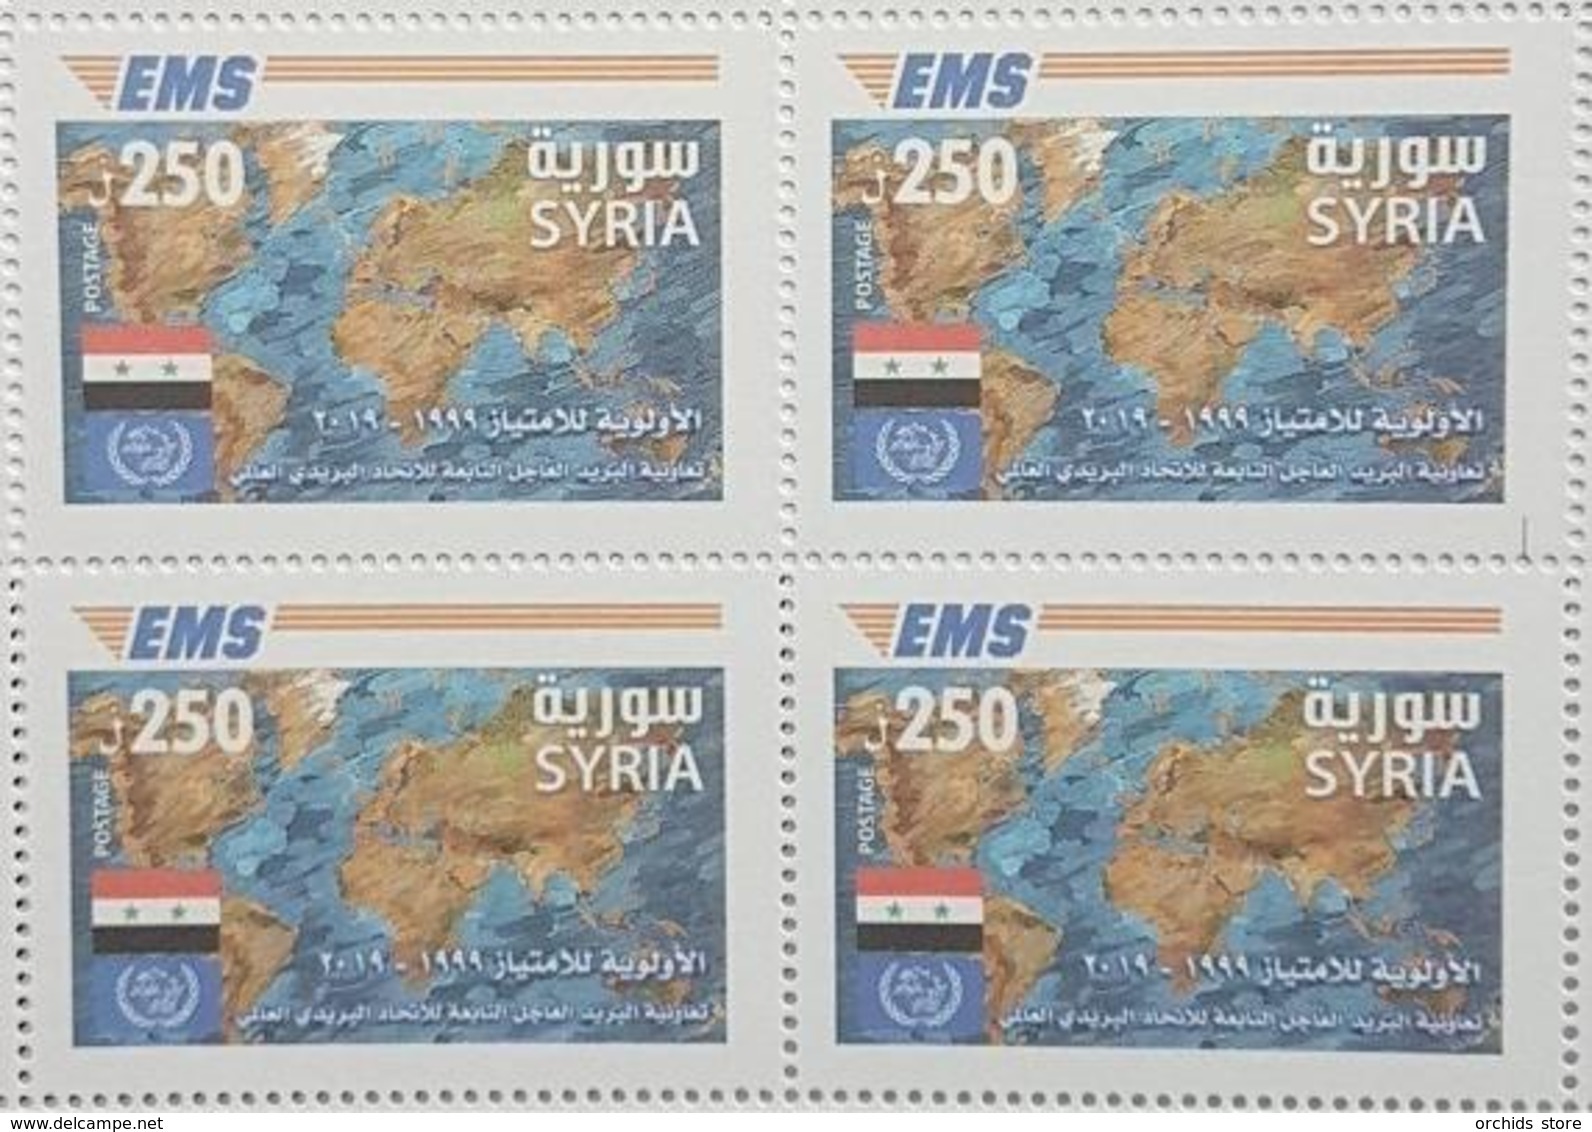 Syria New 2019 MNH Stamp - EMS - Express Mail Service - Worldwide Joint Issue - Blk/4 - Syrië